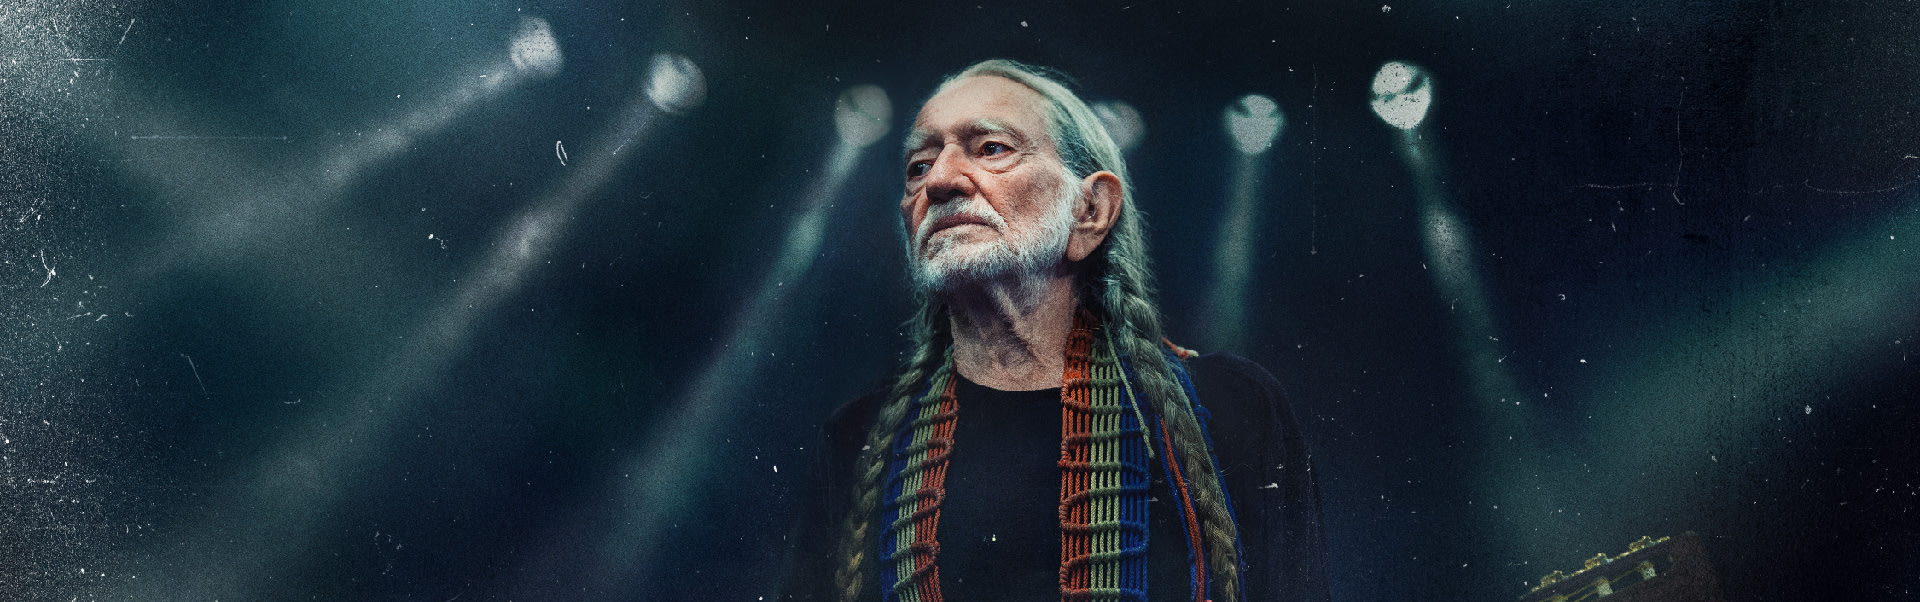 Willie Nelson Slot 2023 - Play This Casino Game From Everi Around the US